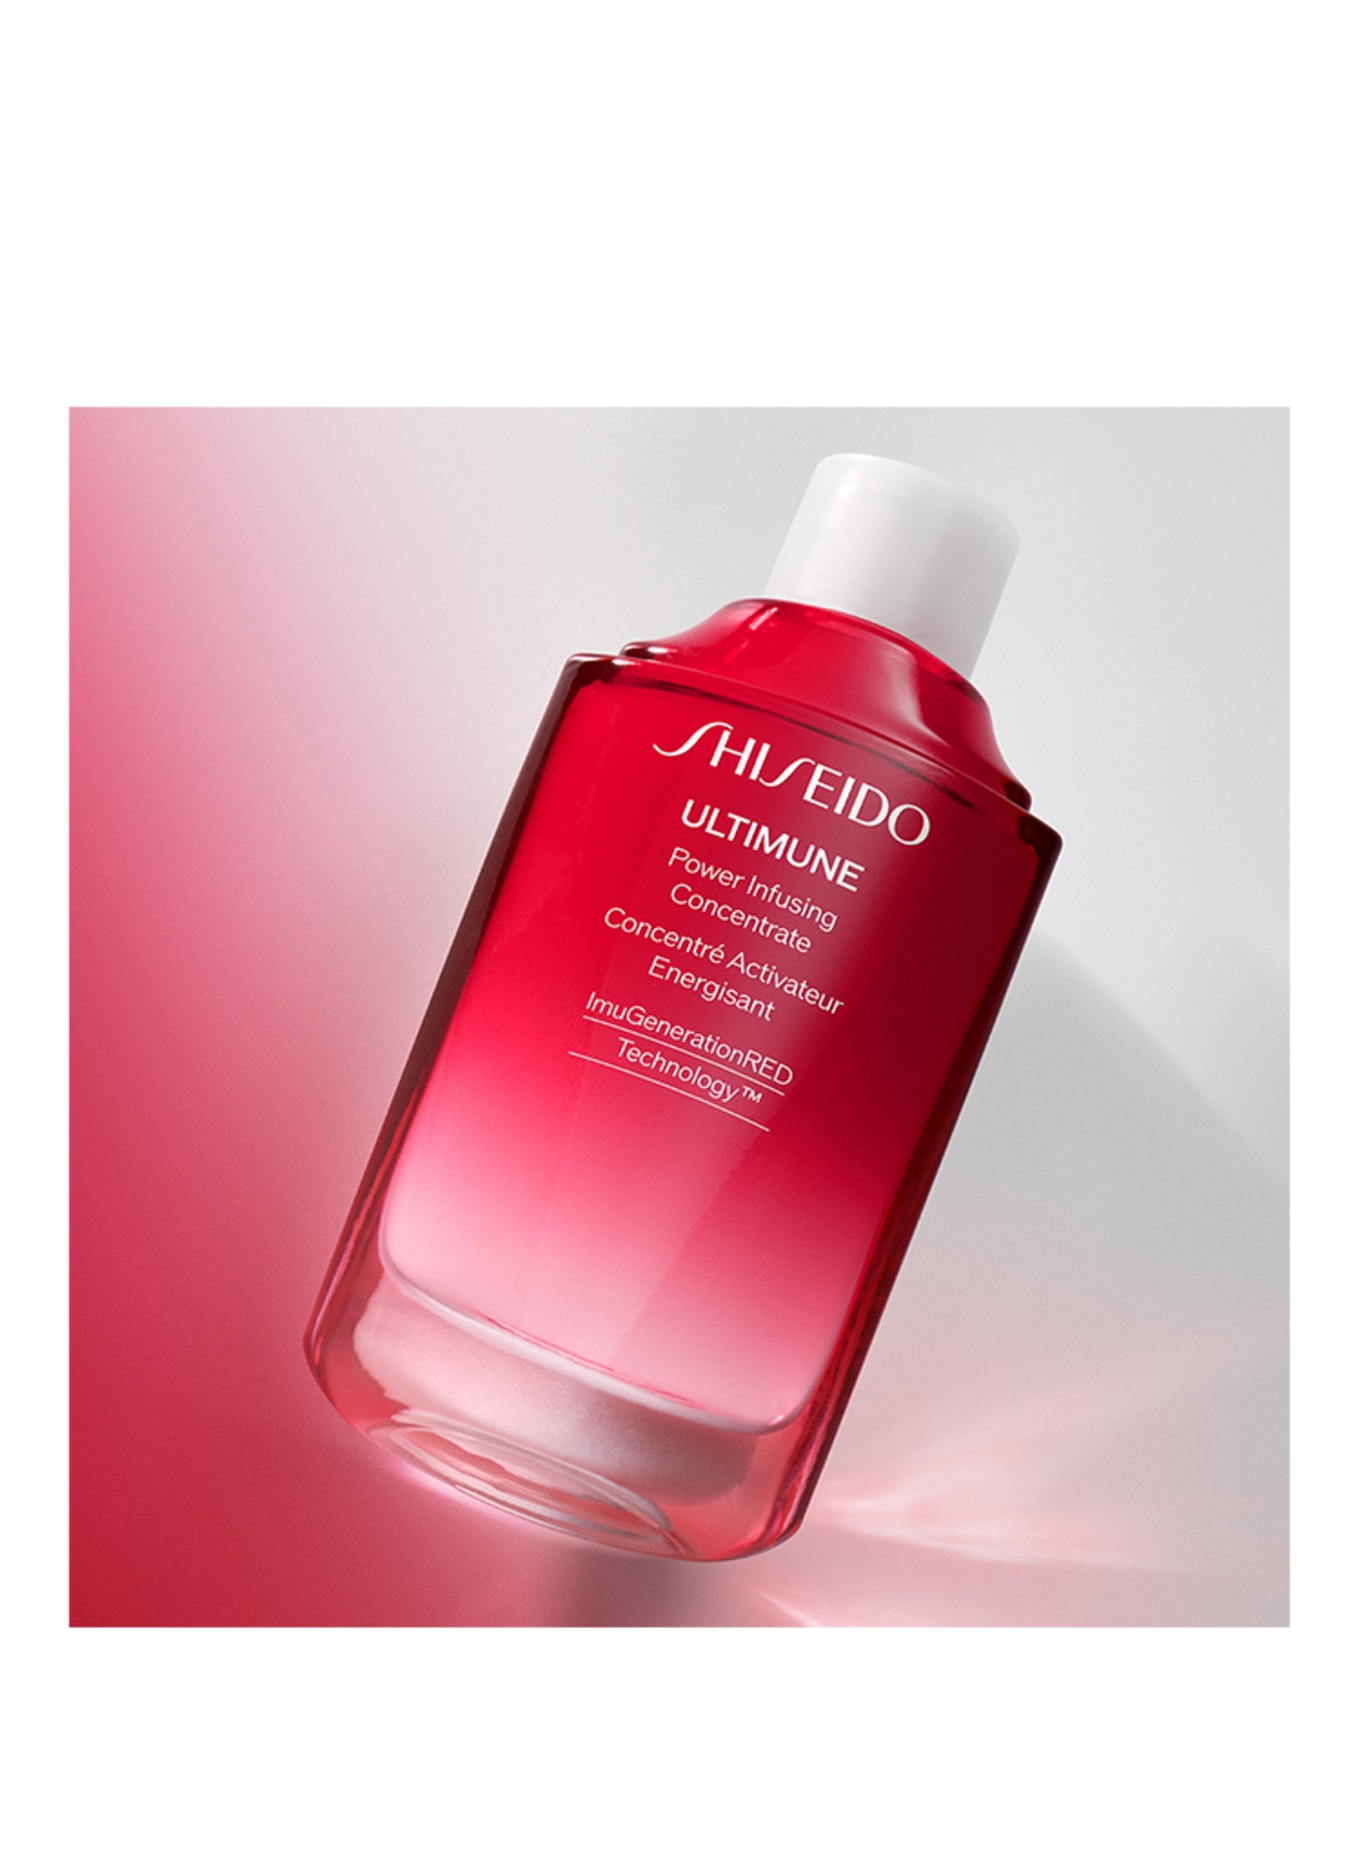 SHISEIDO ULTIMUNE POWER INFUSING CONCENTRATE REFILL (Obrazek 3)